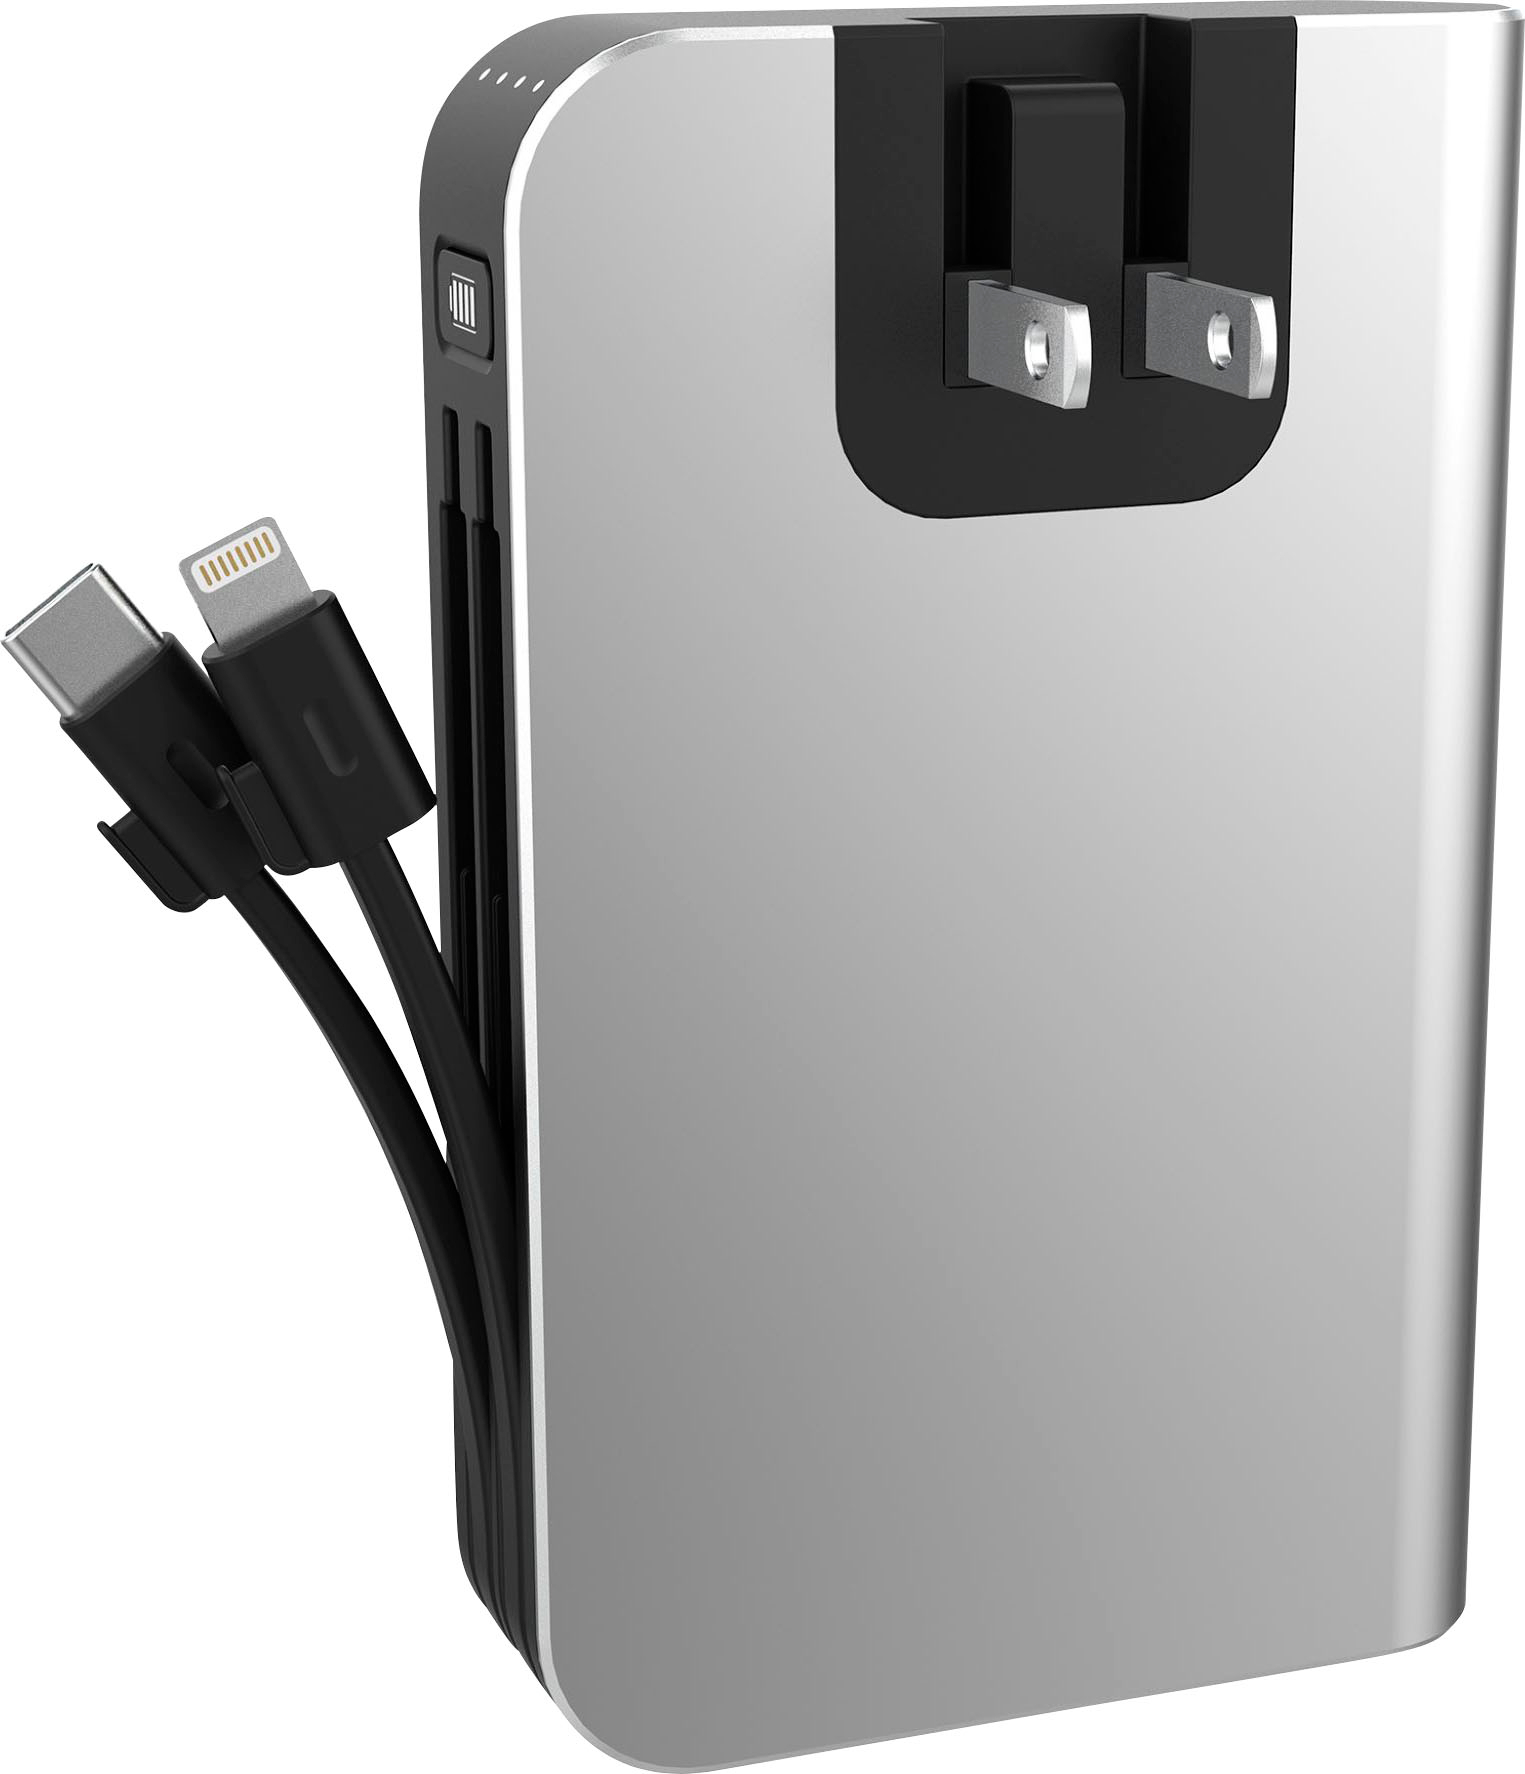 Angle View: myCharge - HUB Universal 4400mAh All-In-One Charger for any Apple or Android Device - Silver